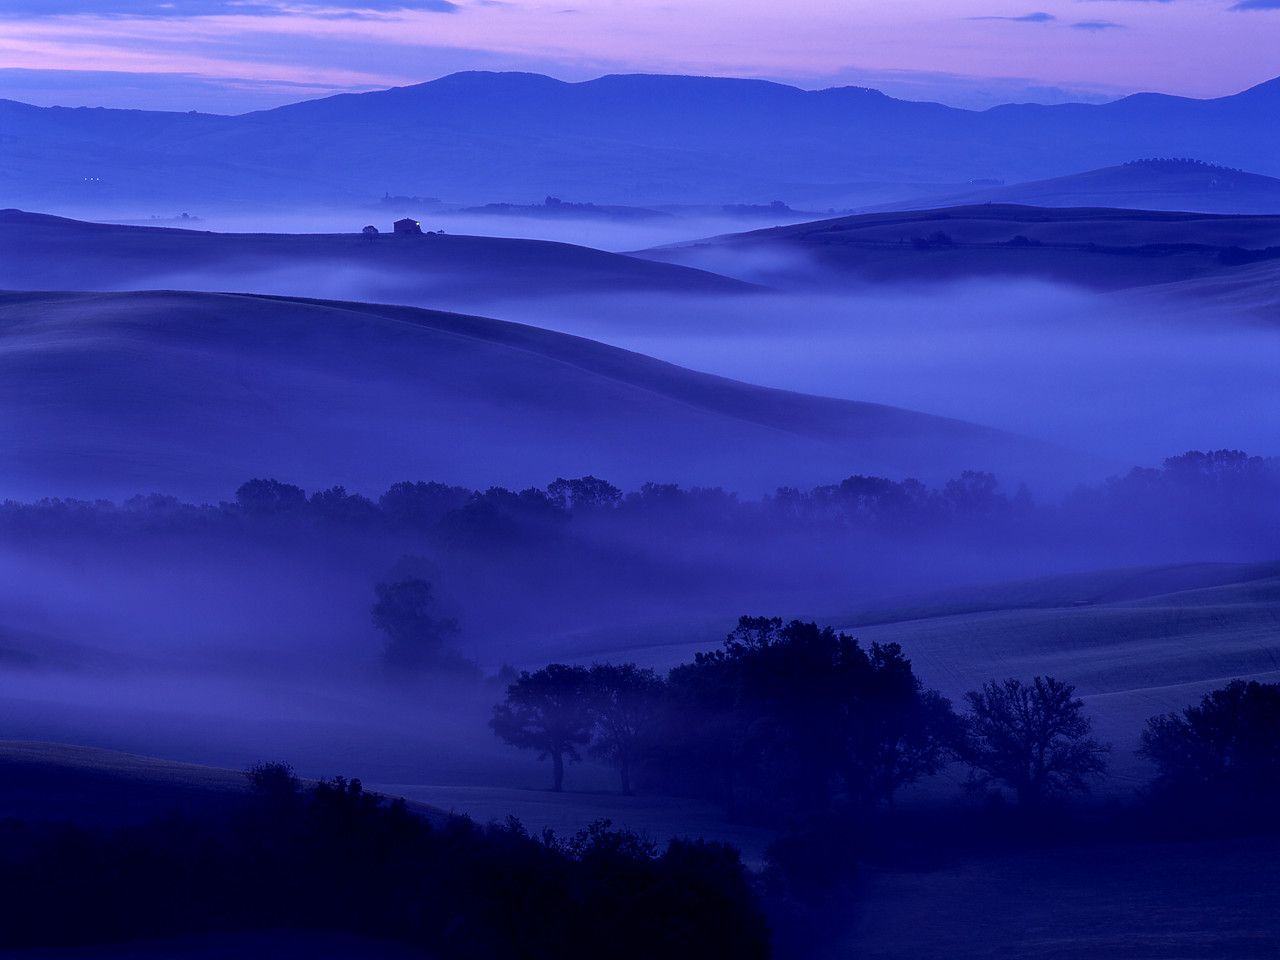 #020140-4 - Valley in Mist, San Quirico d'Orcia, Tuscany, Italy